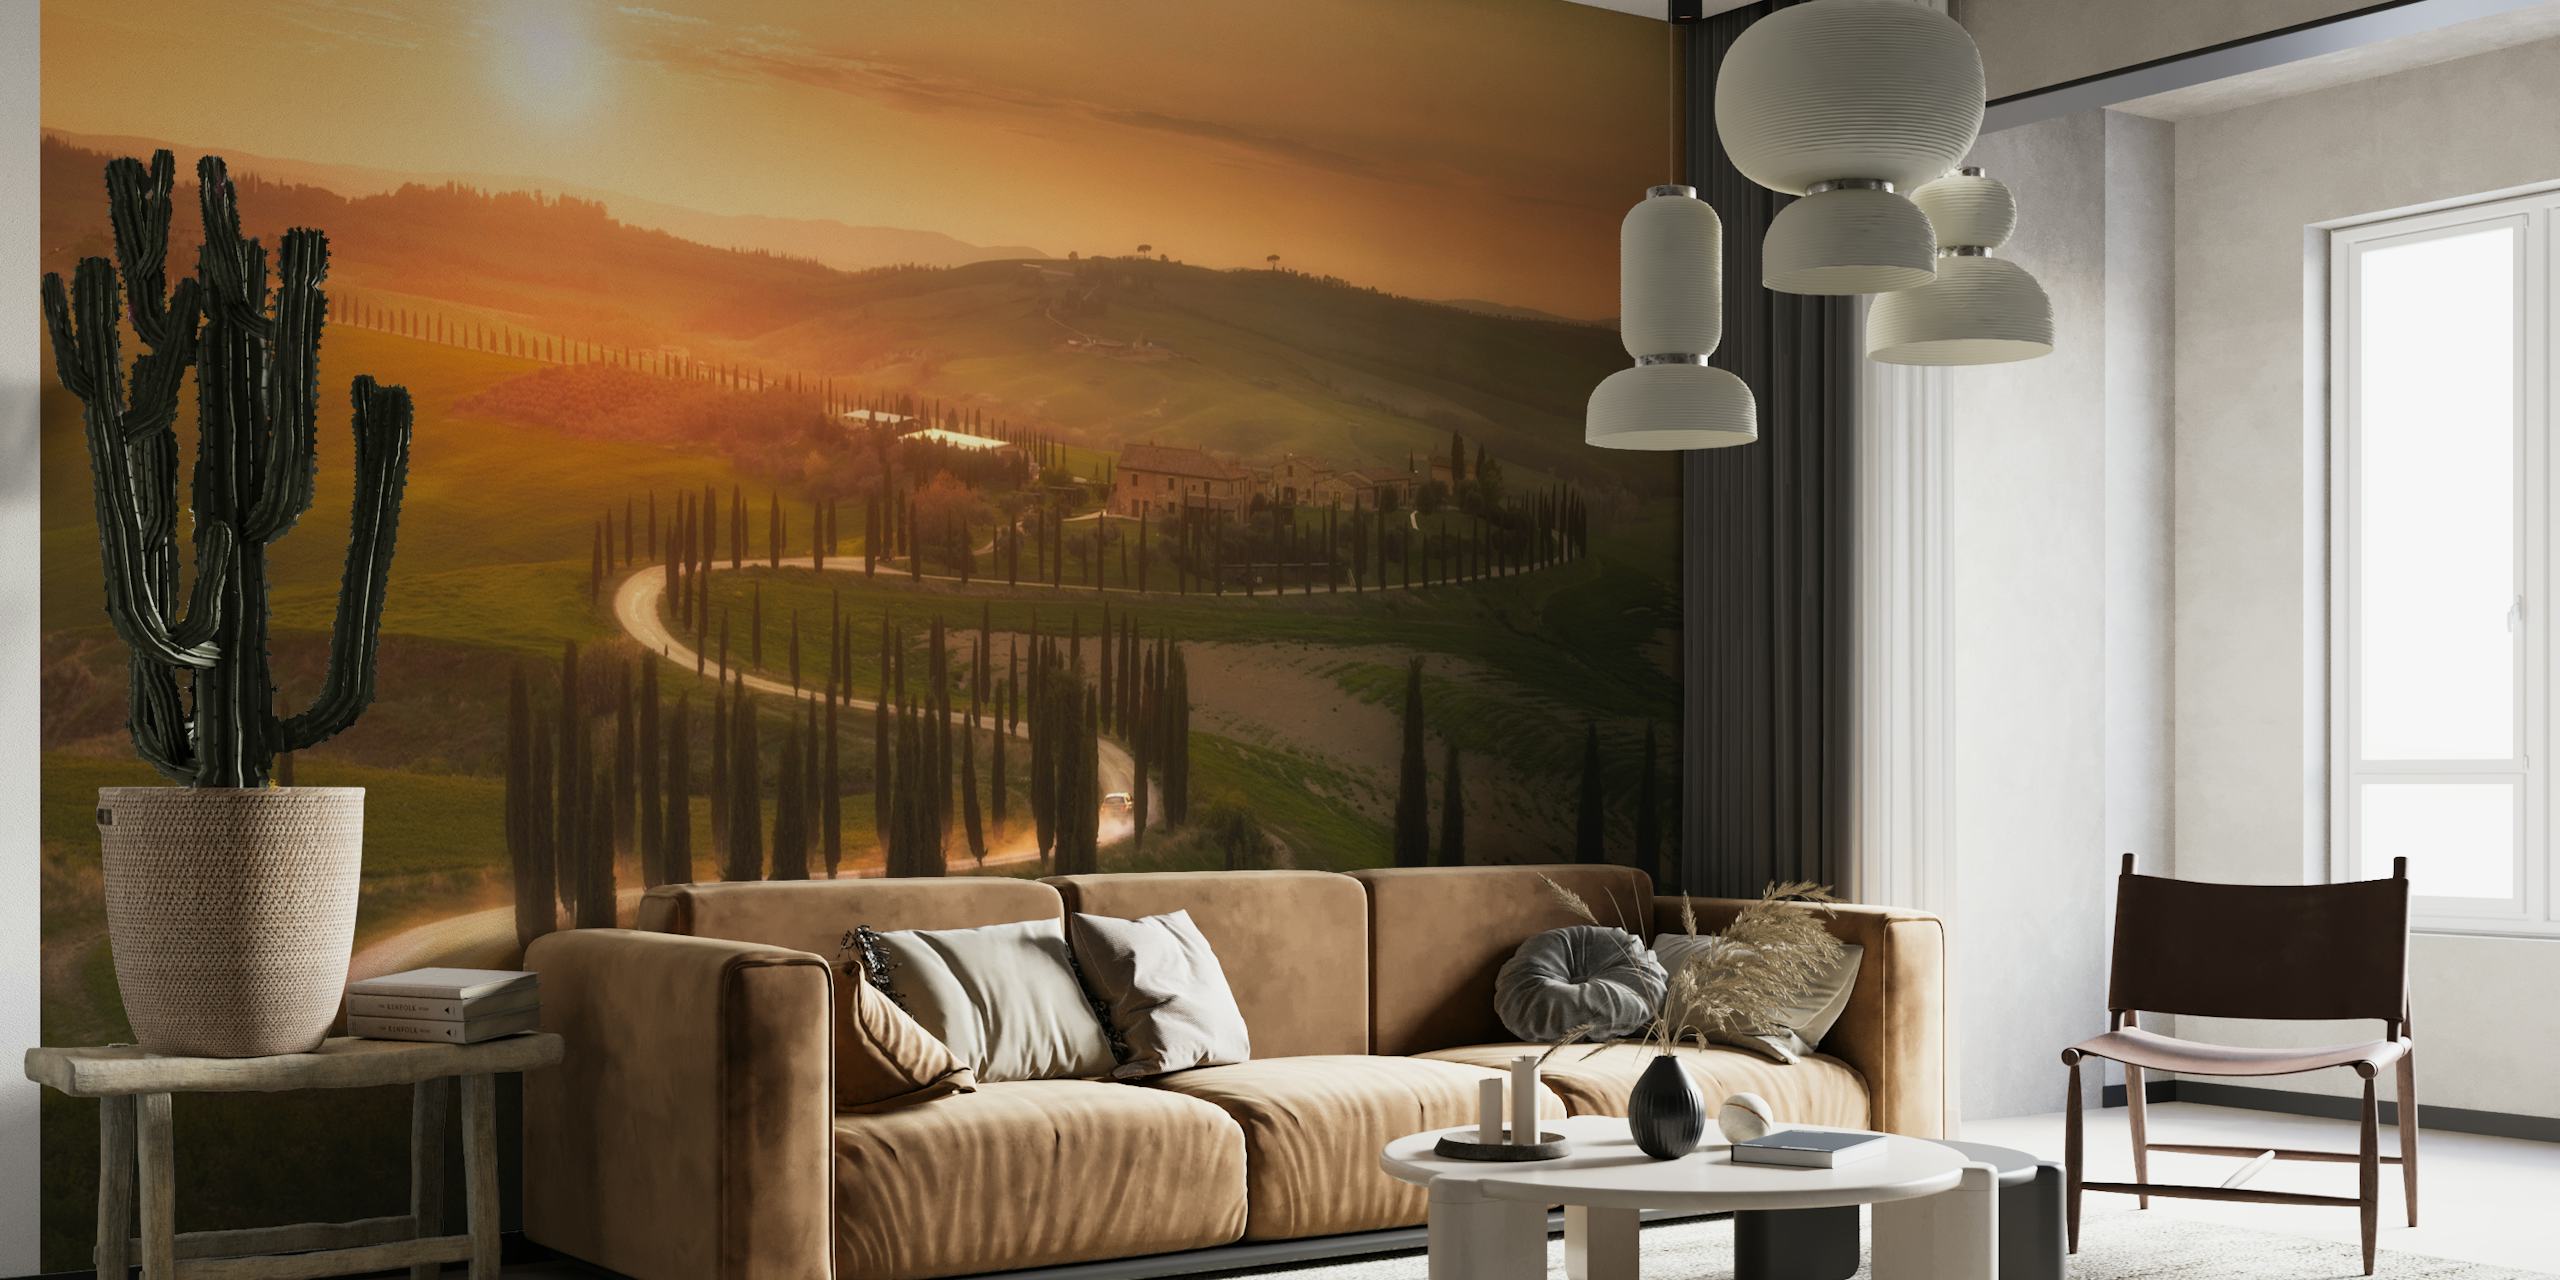 Sunset over Tuscany hills wall mural depicting a scenic evening landscape.